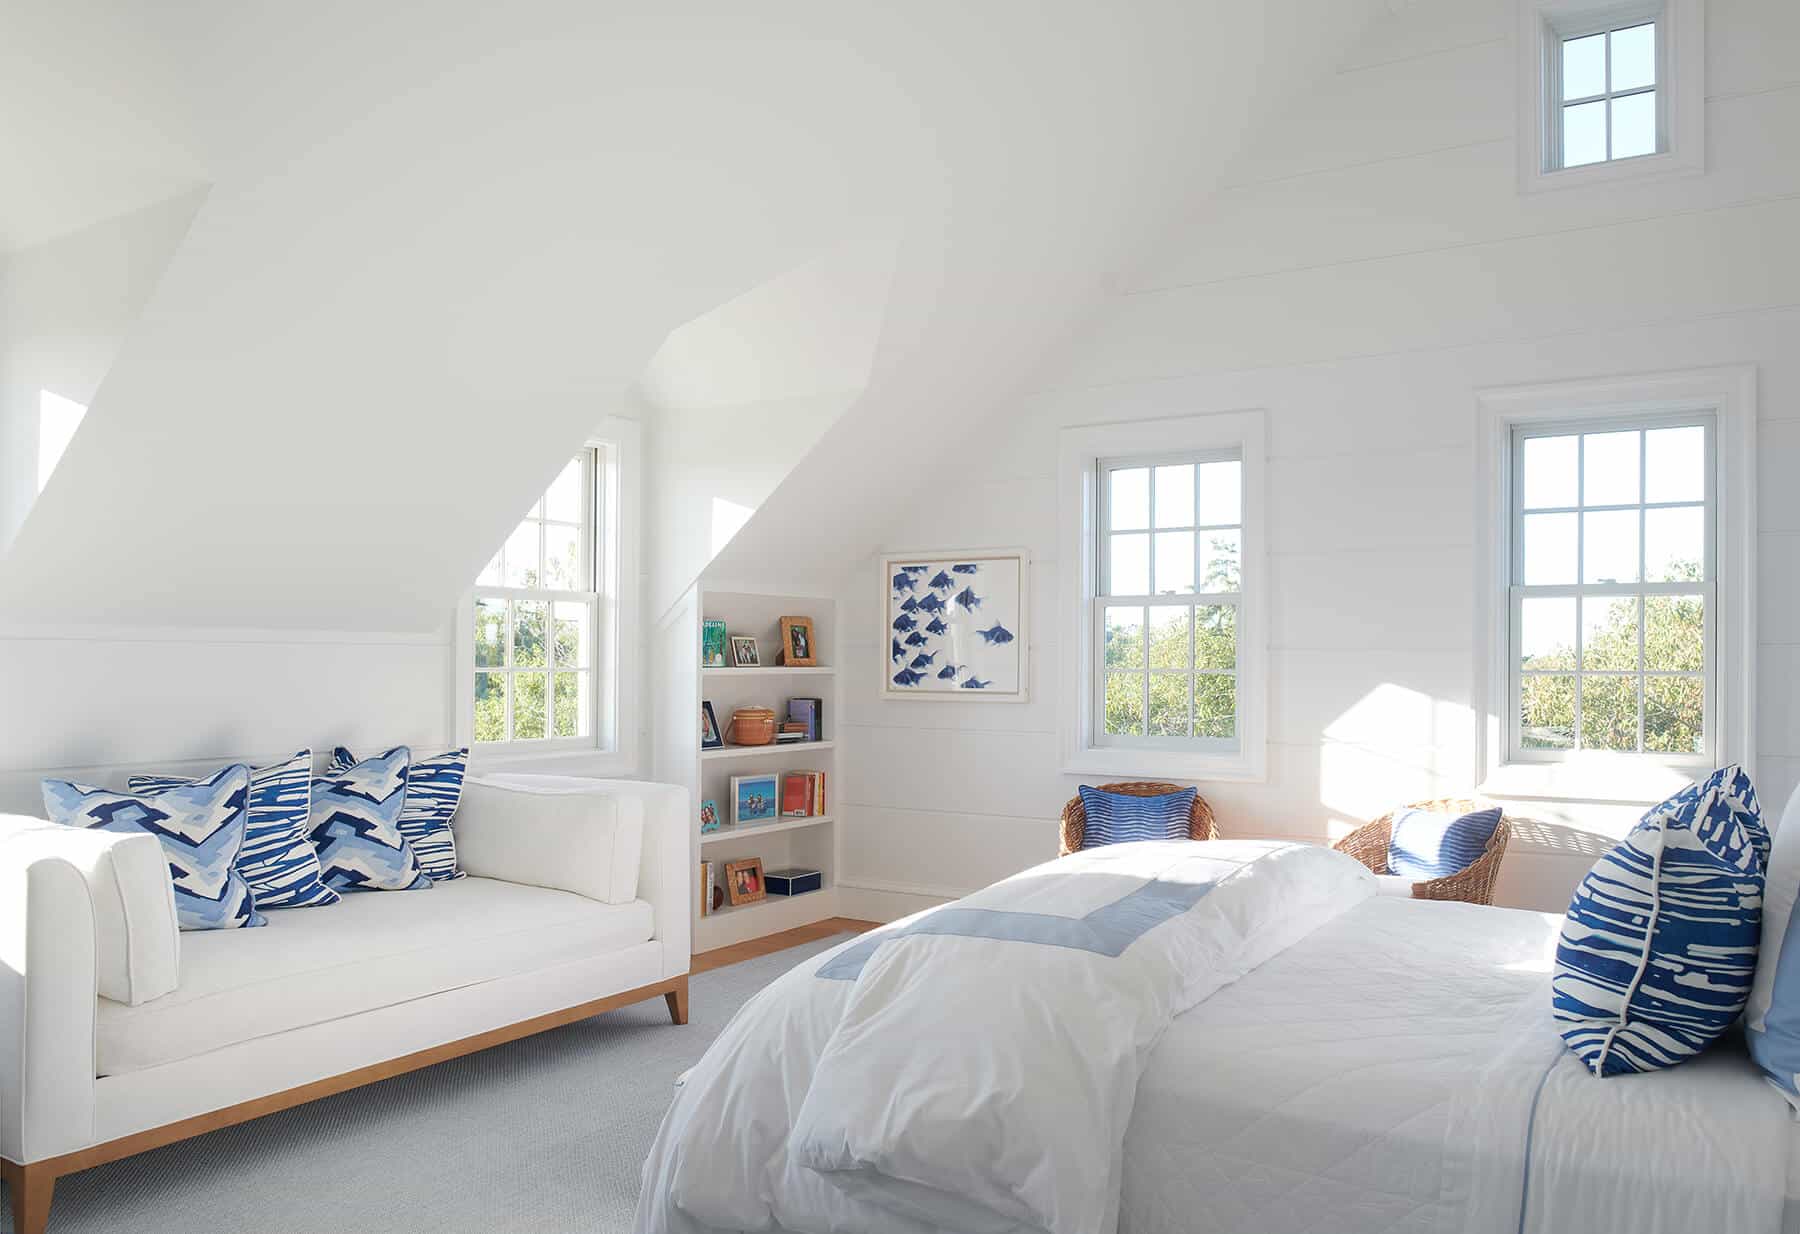 Nantucket, blue and white bedroom view with sloped ceiling